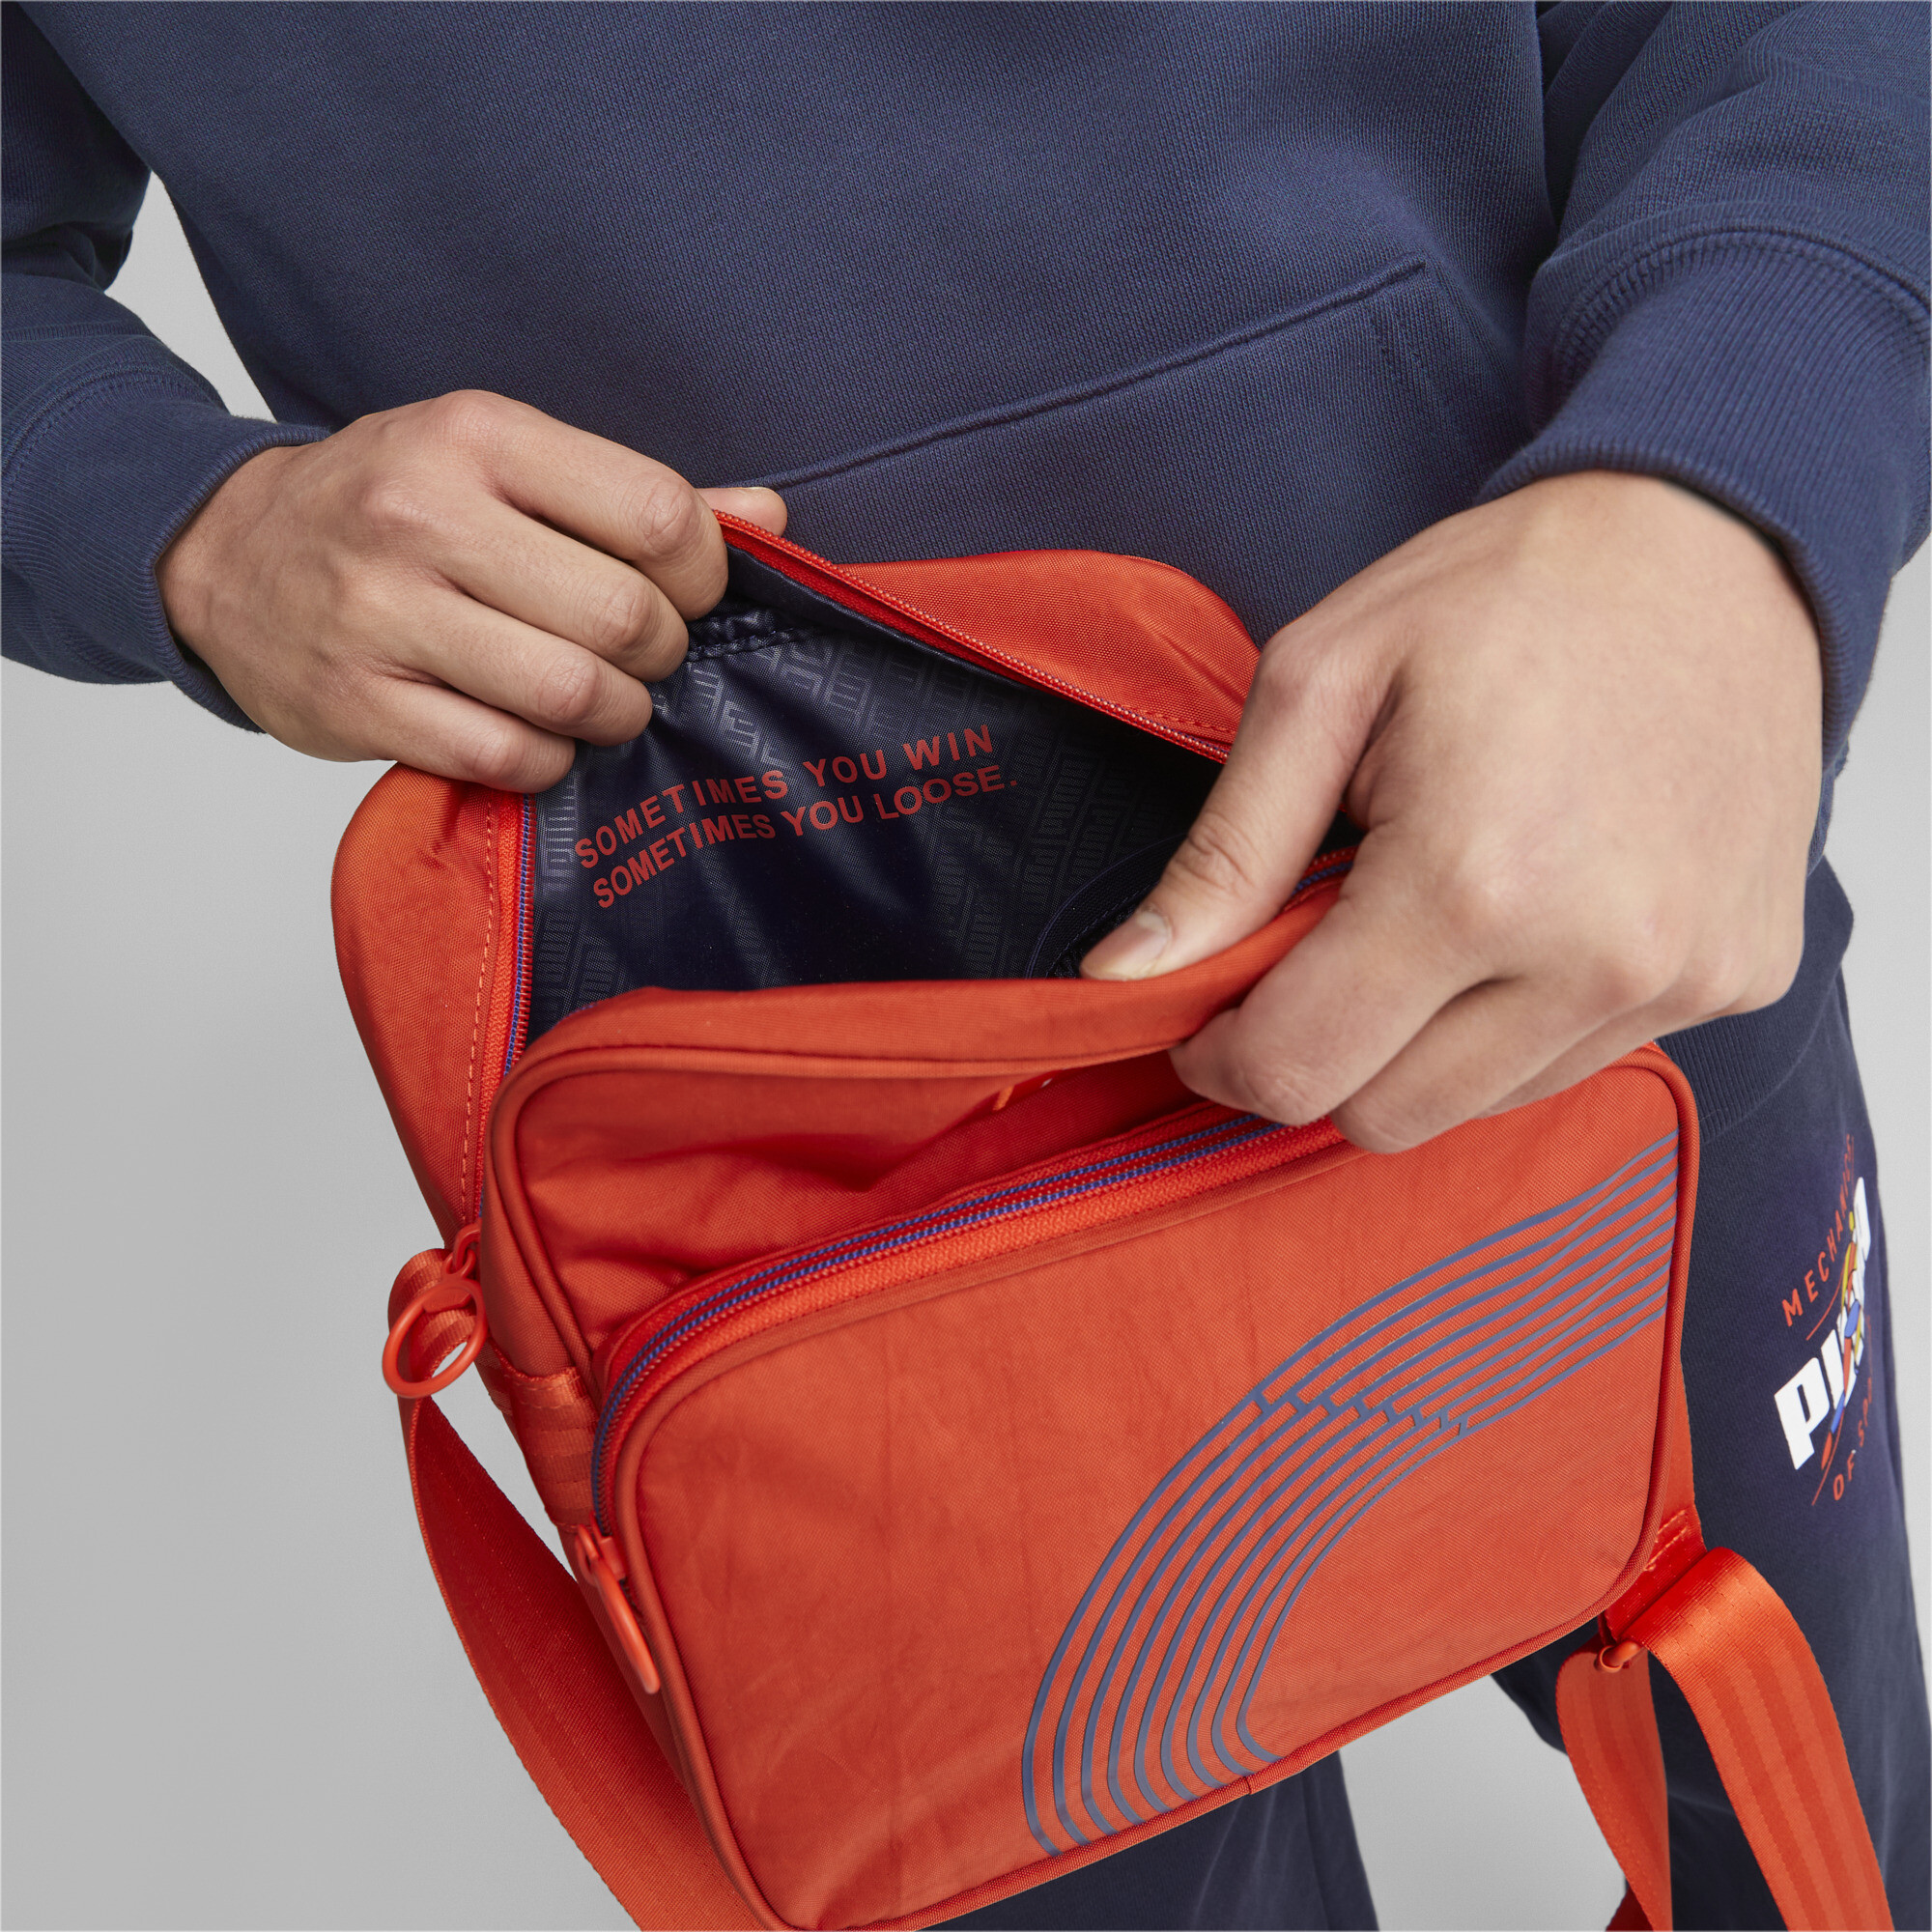 Men's PUMA Fast Track Portable Bag In 120 - Red